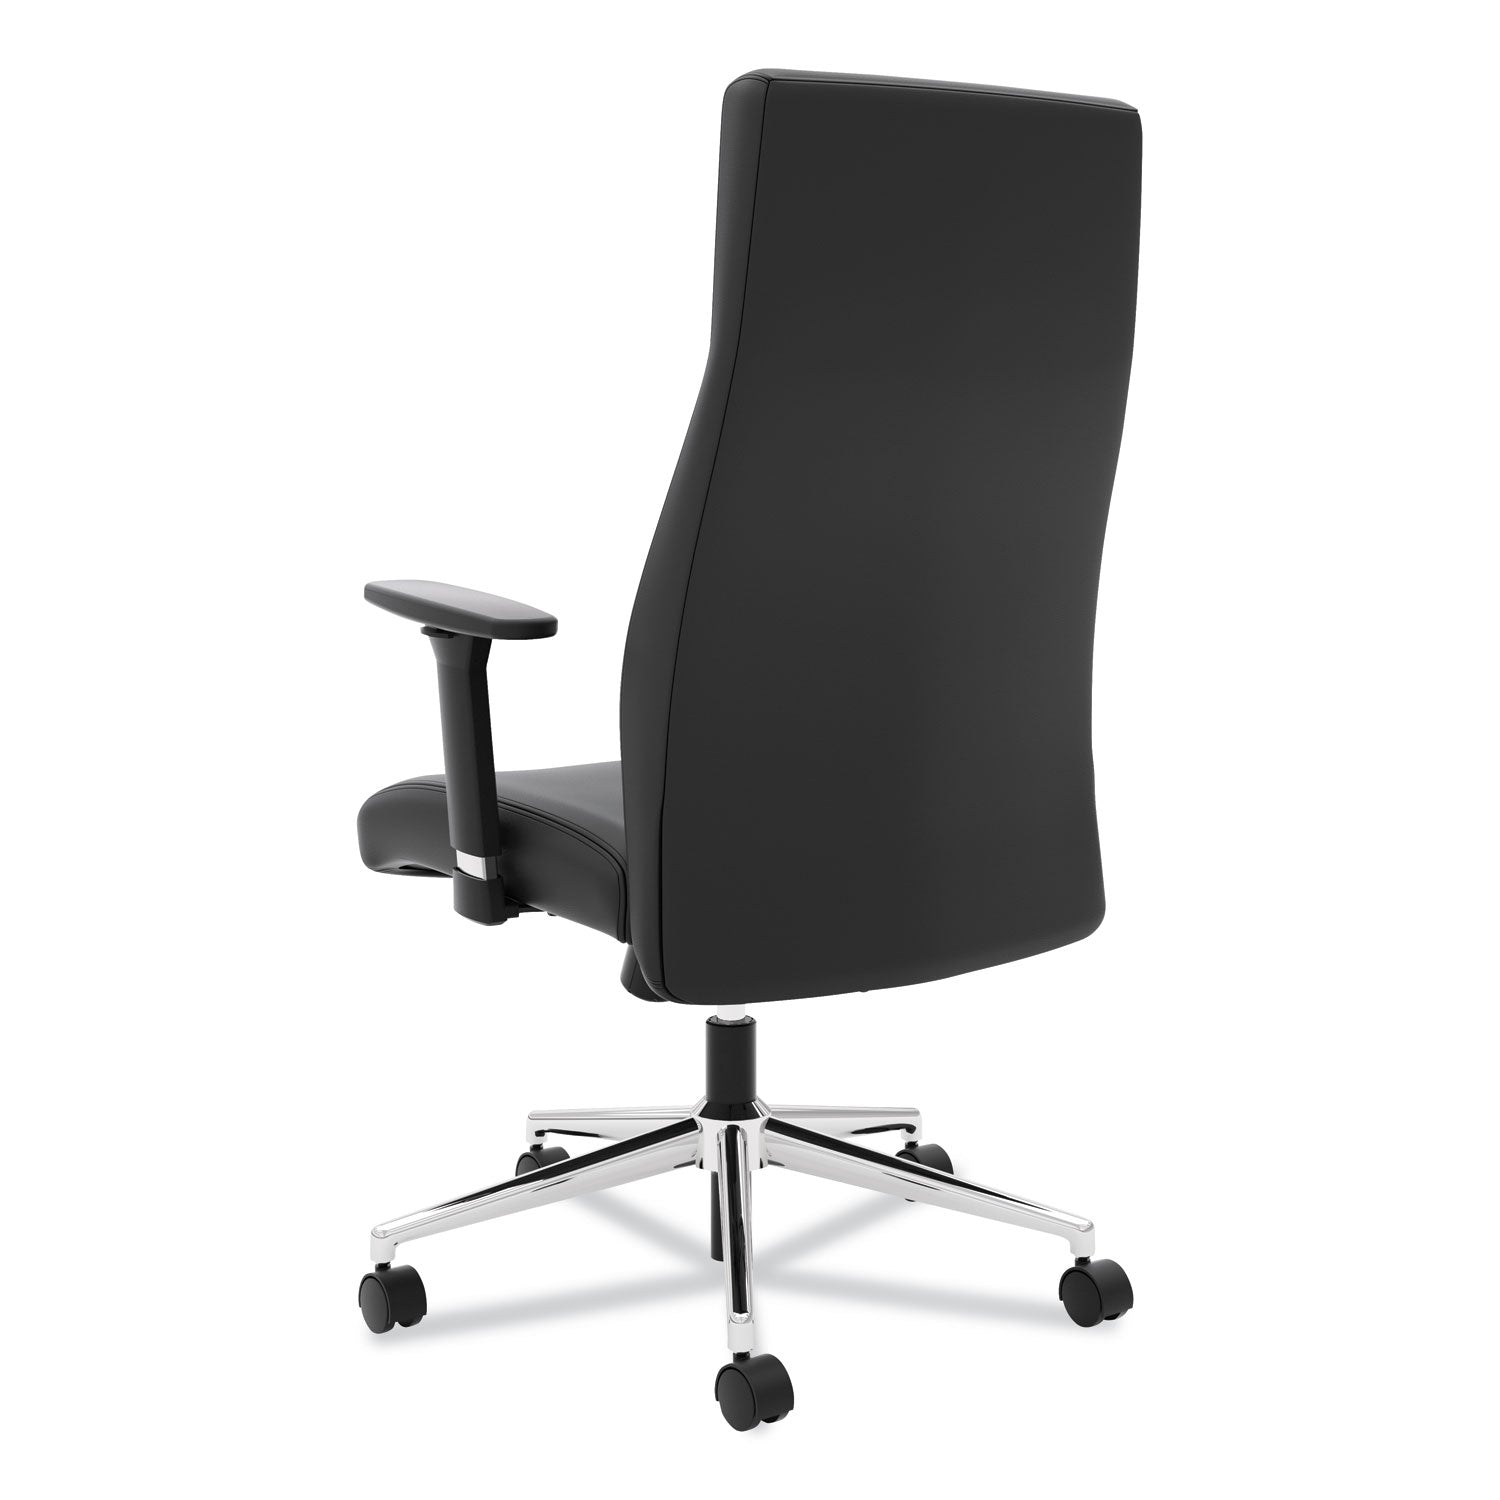 define-executive-high-back-leather-chair-supports-250-lb-17-to-21-seat-height-black-seat-back-polished-chrome-base_bsxvl108sb11 - 6